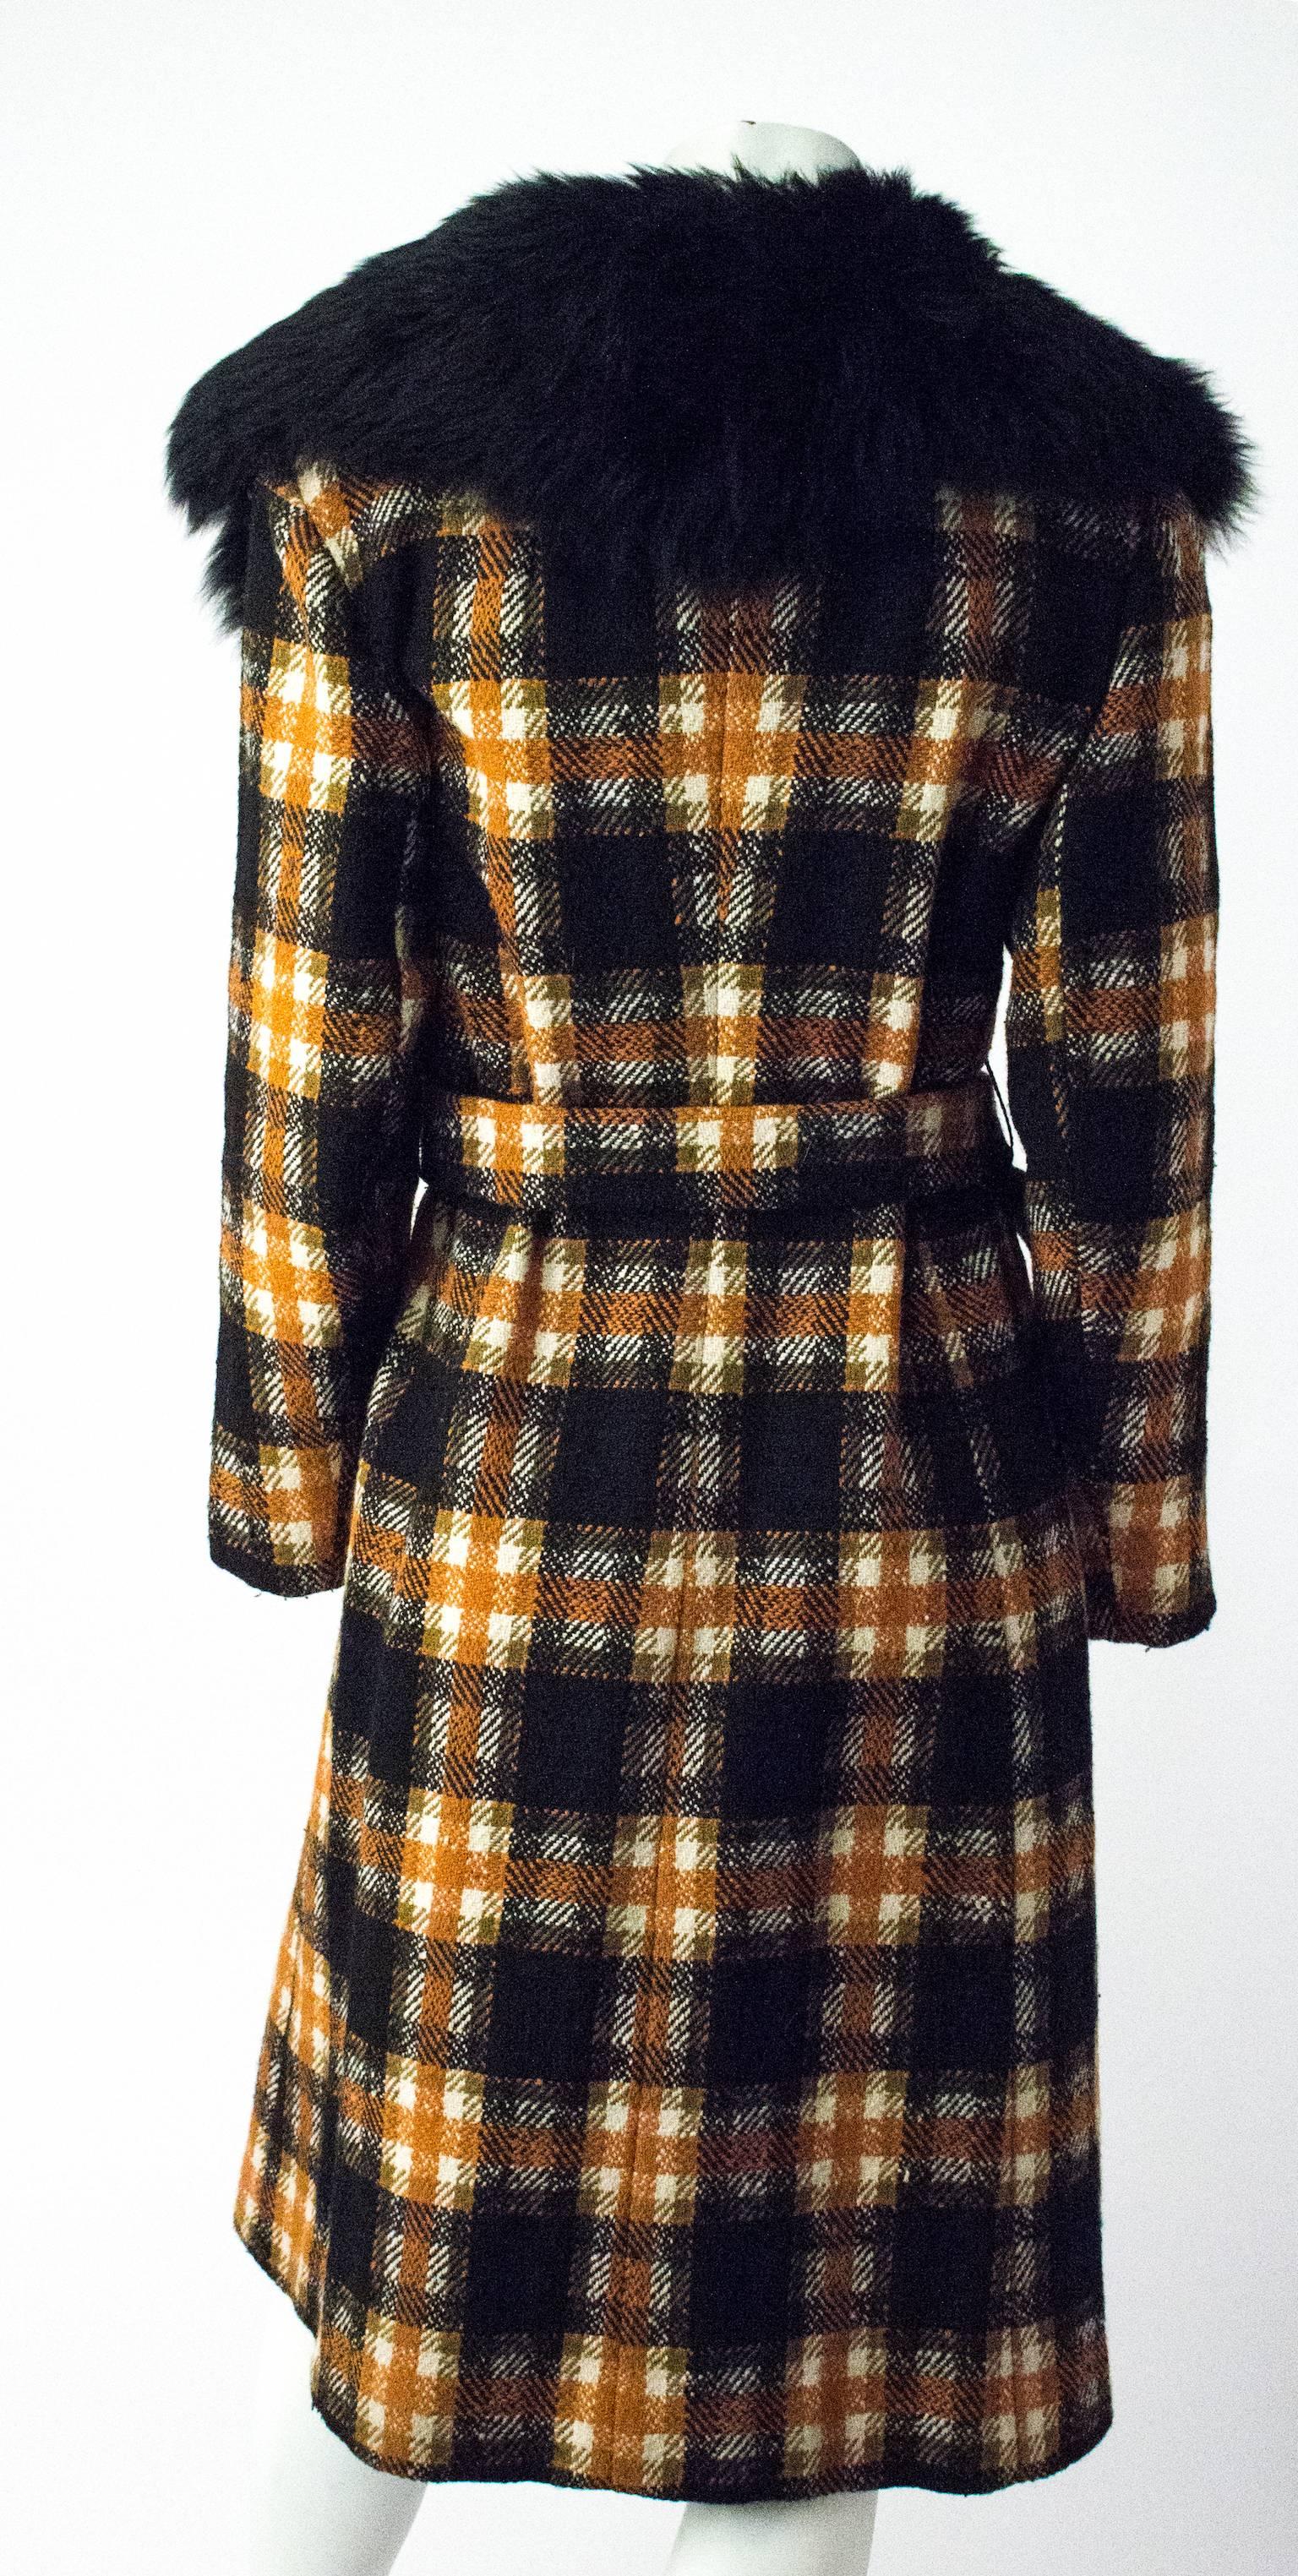 1970s orange and black plaid wool coat. Faux fur collar. Inseam front pockets.